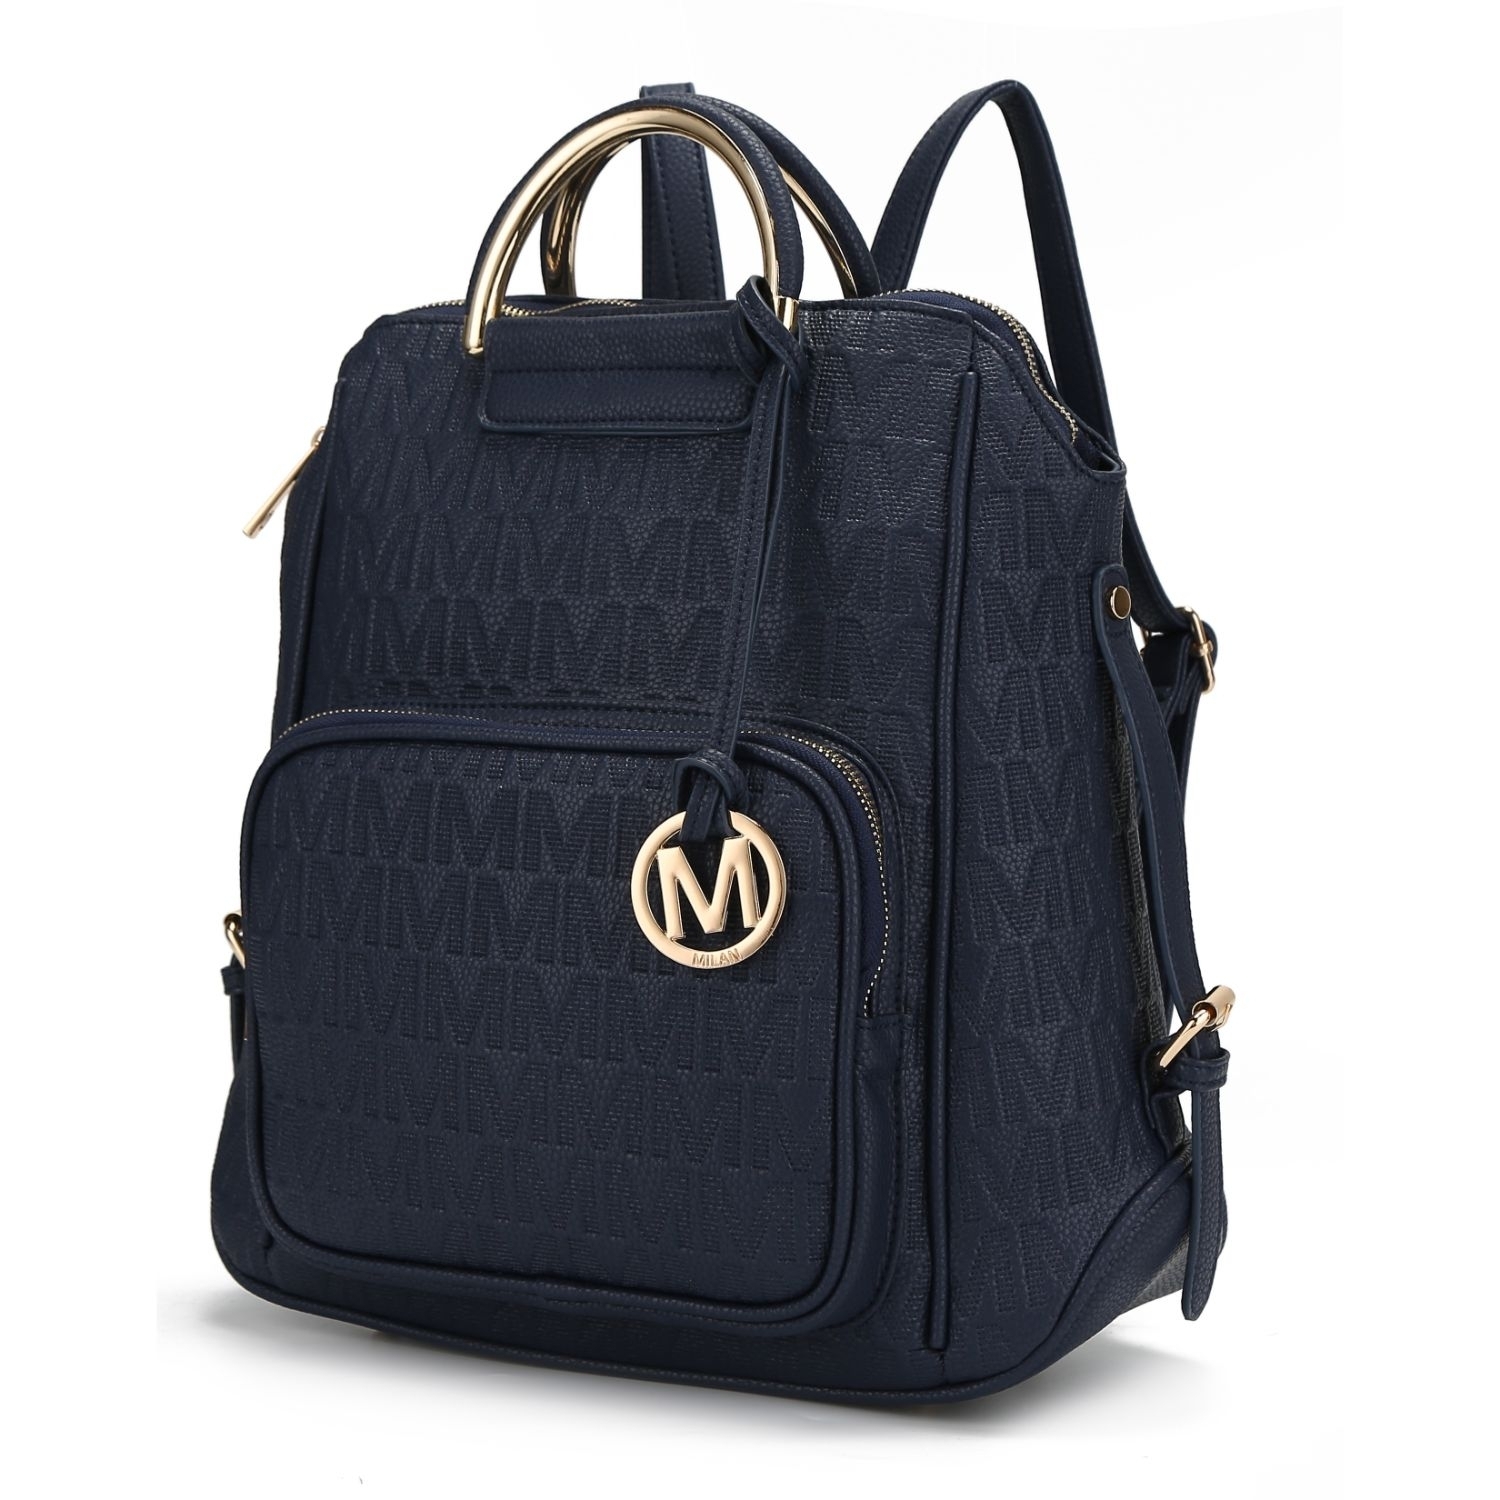 MKF Collection Torra Milan .M. Signature Trendy Backpack By Mia K. - Navy